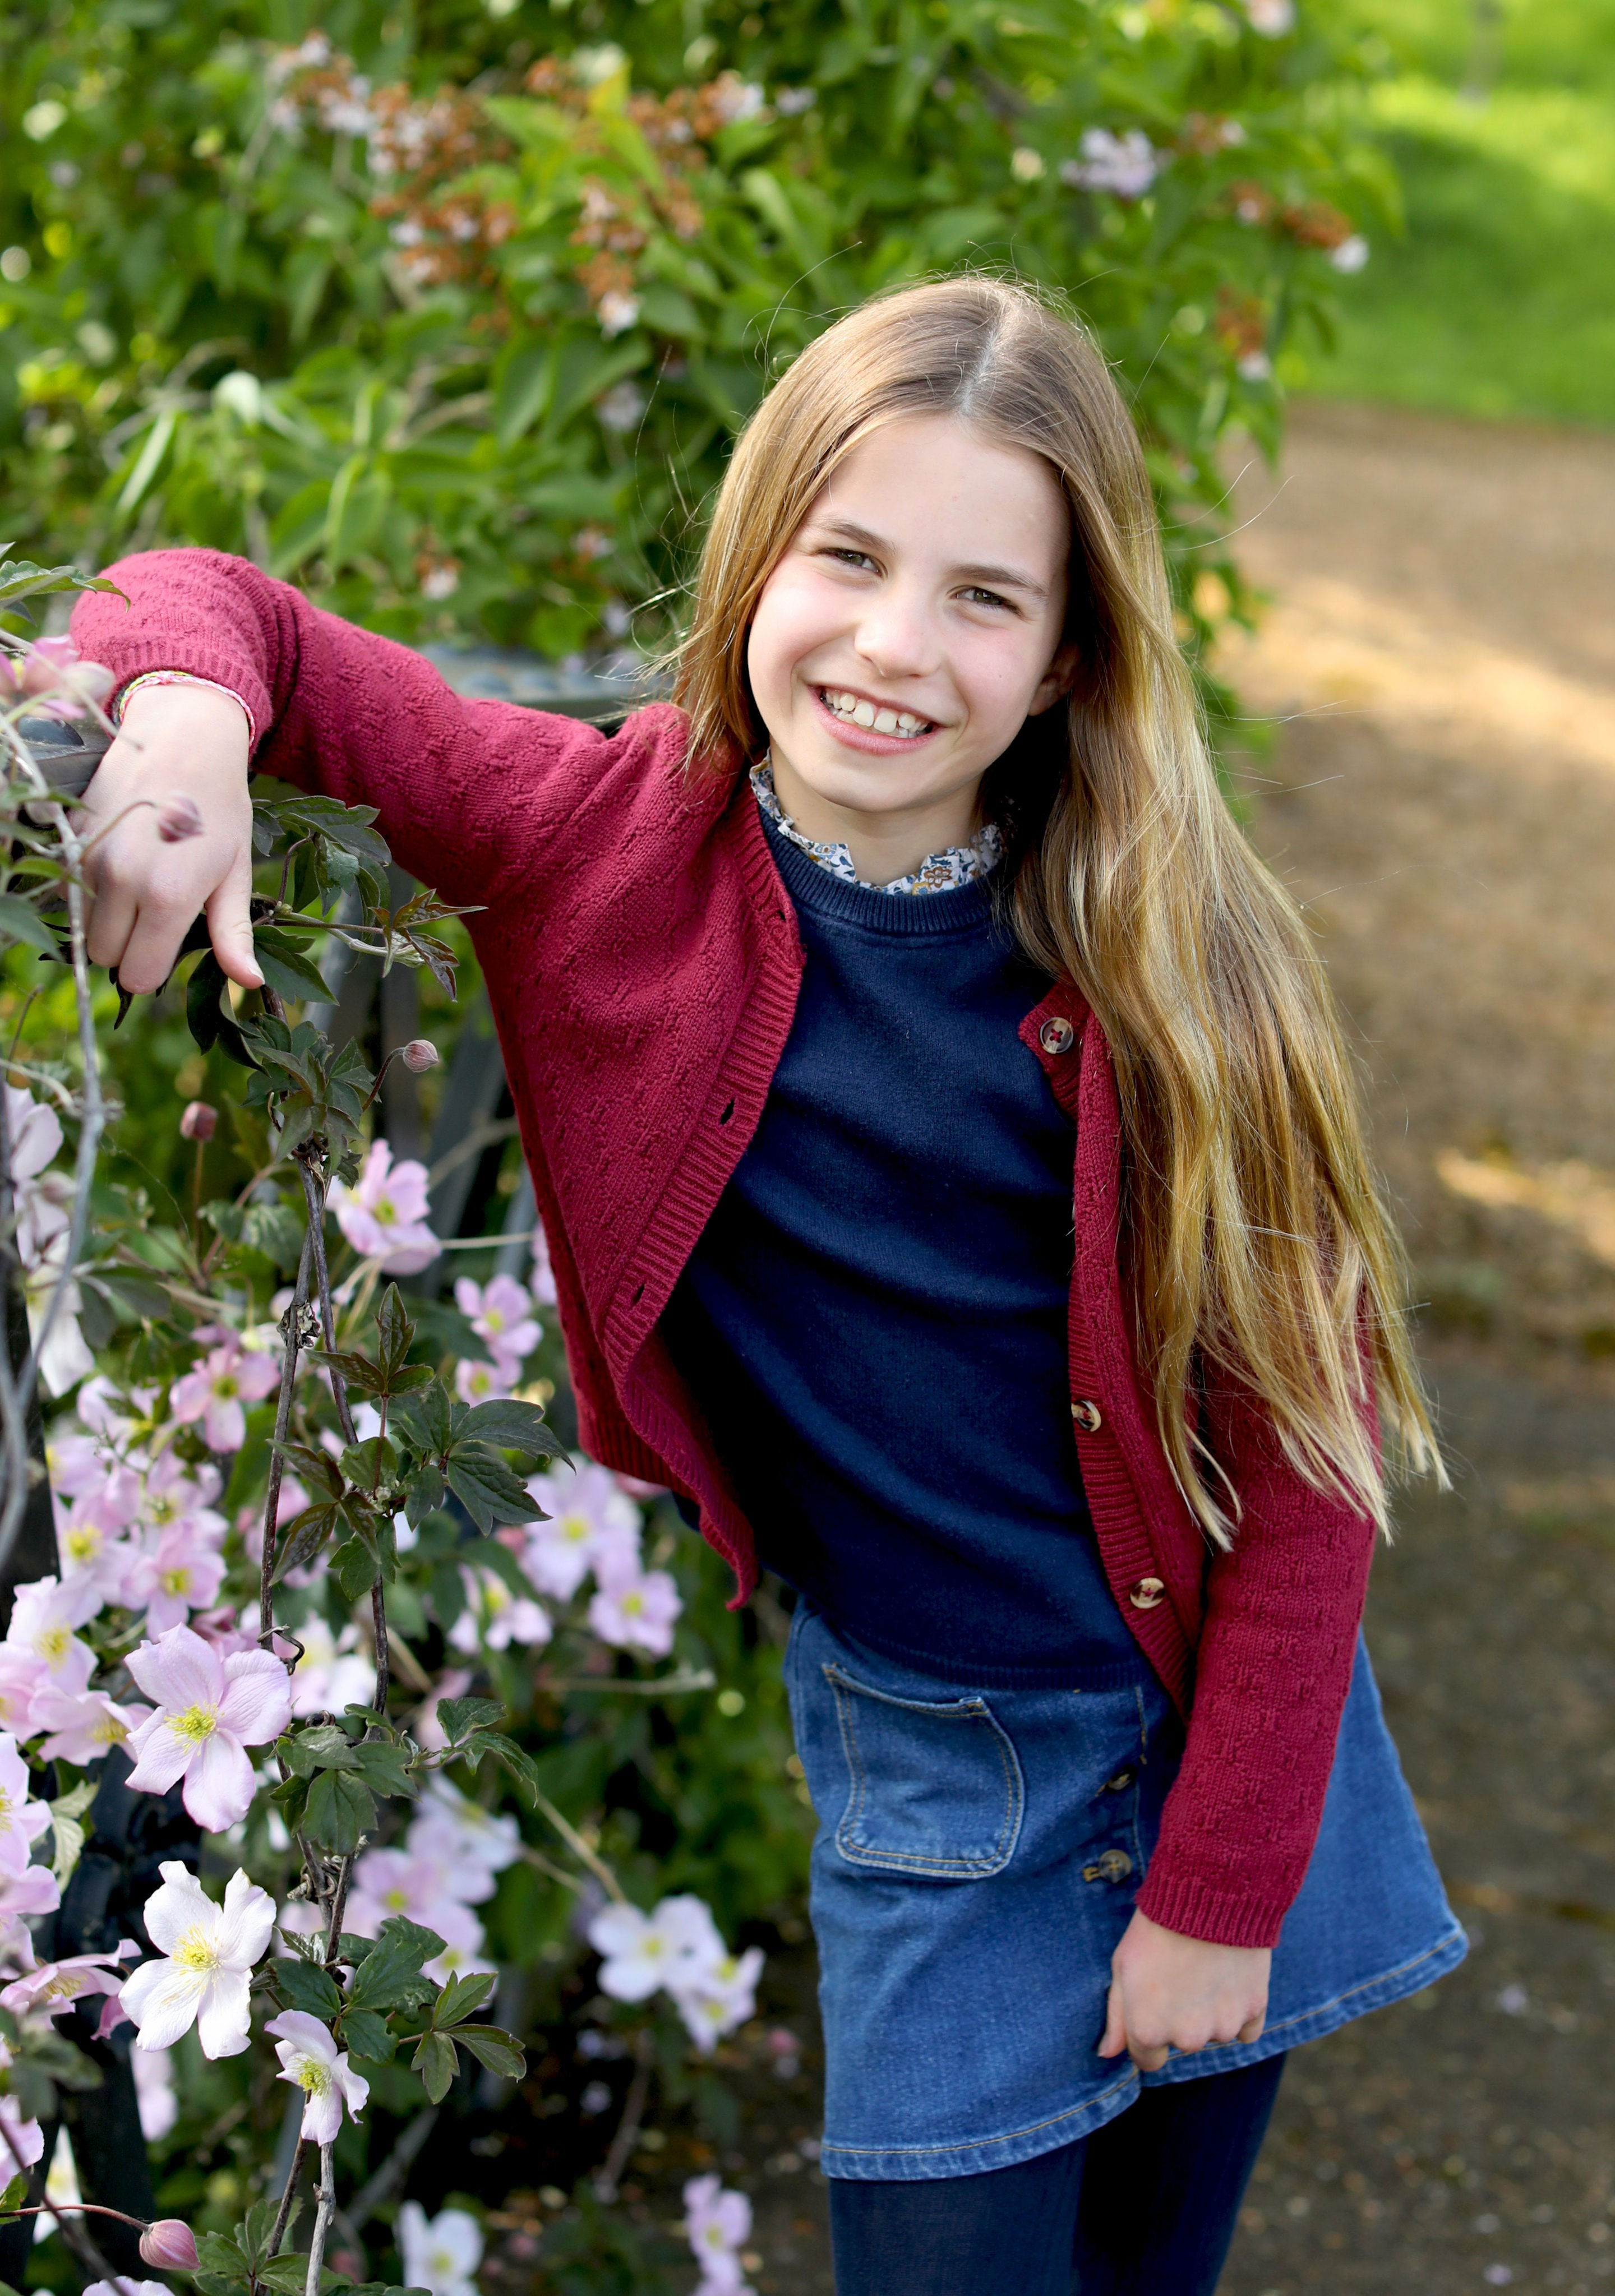 new photo of princess charlotte taken by kate shared to mark her ninth birthday